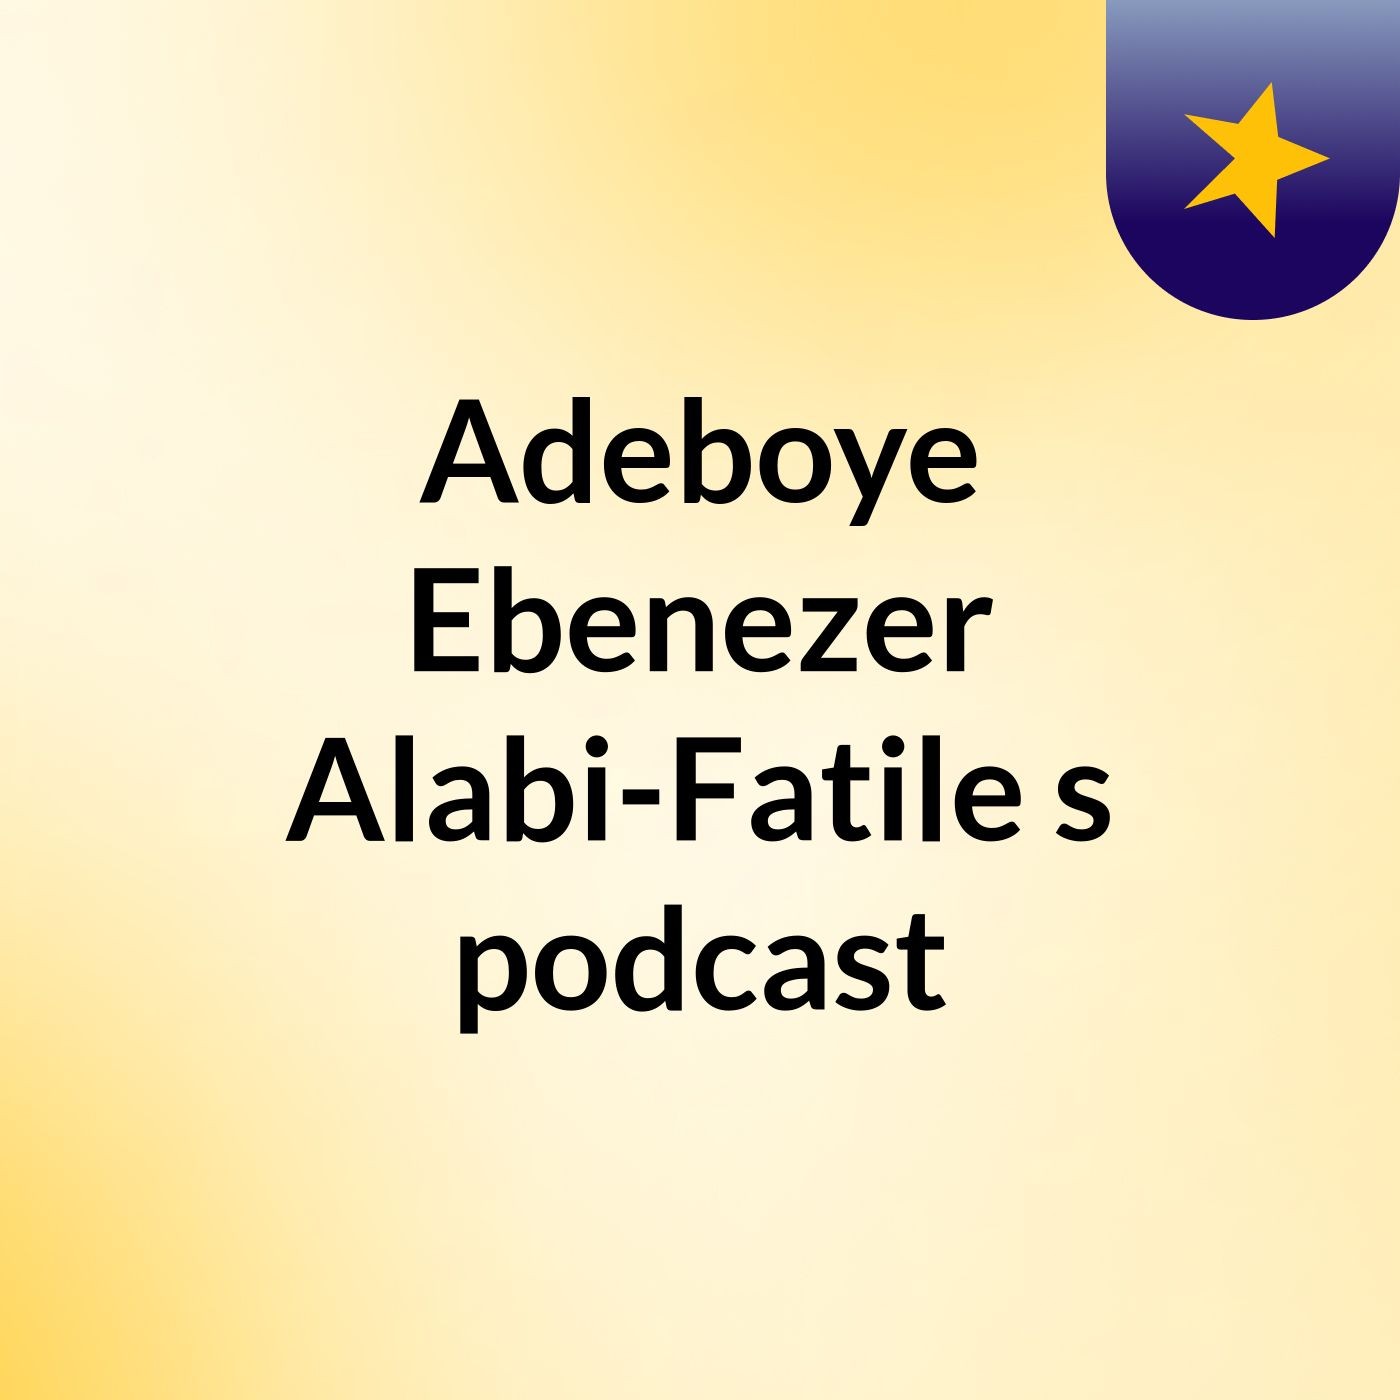 Episode 4 - Patience: a must have virtue by Adeboye Ebenezer Alabi-Fatile